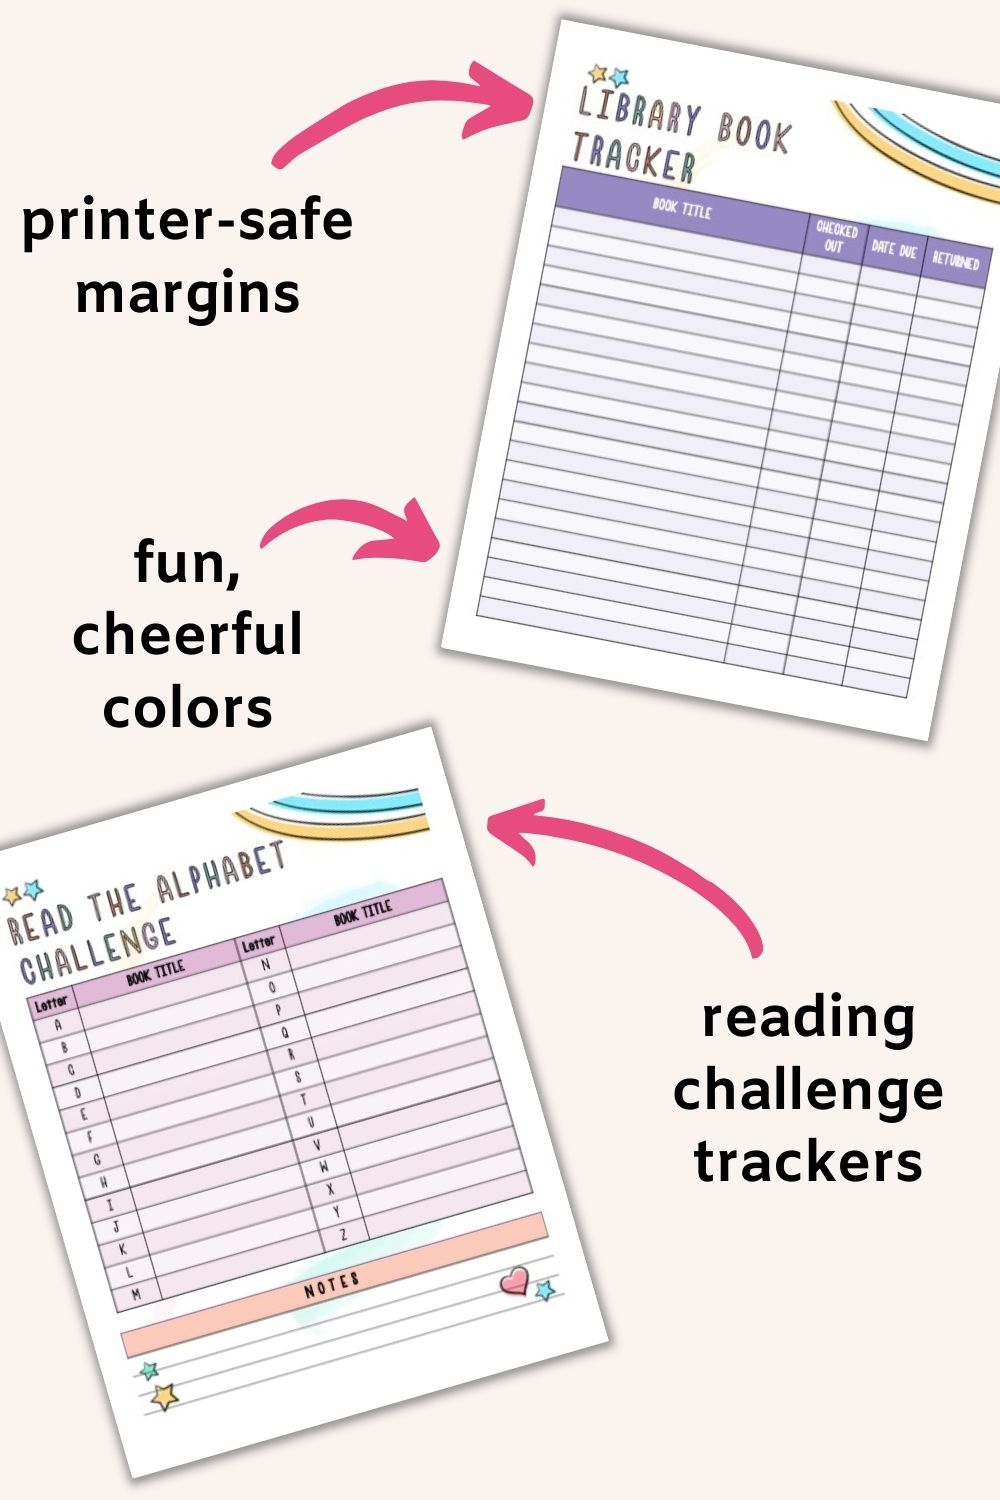 Text "printer safe margins, fun, cheerful colors, and reading challenge trackers" with arrows pointing at a library book tracker pages and a read the alphabet challenge tracker